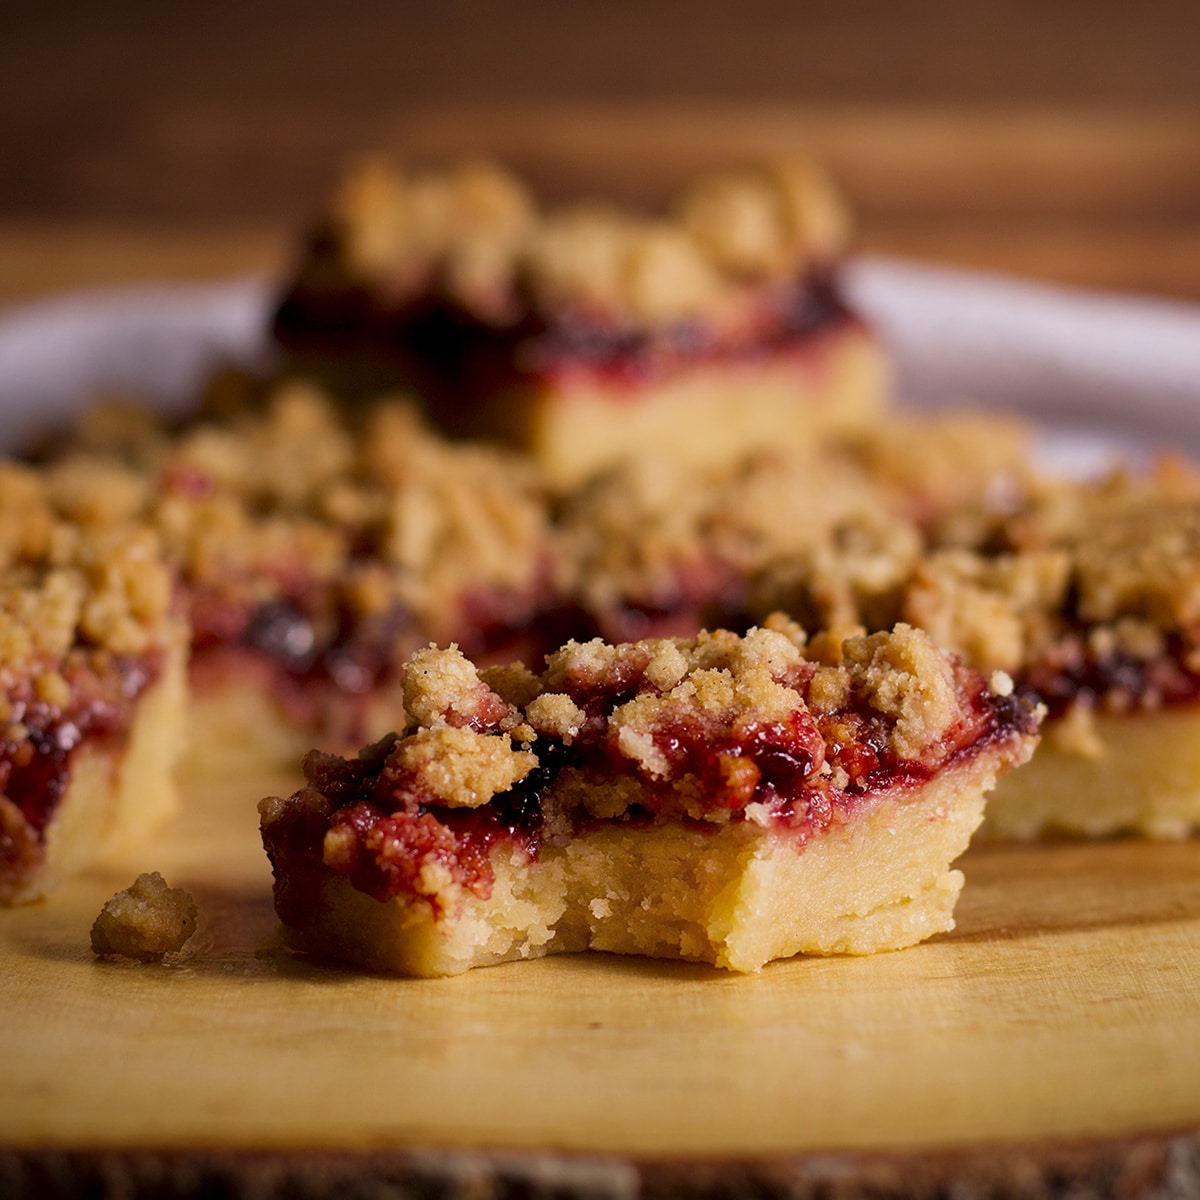 A closeup photo of a cherry crumble bar with a bite taken out of it.